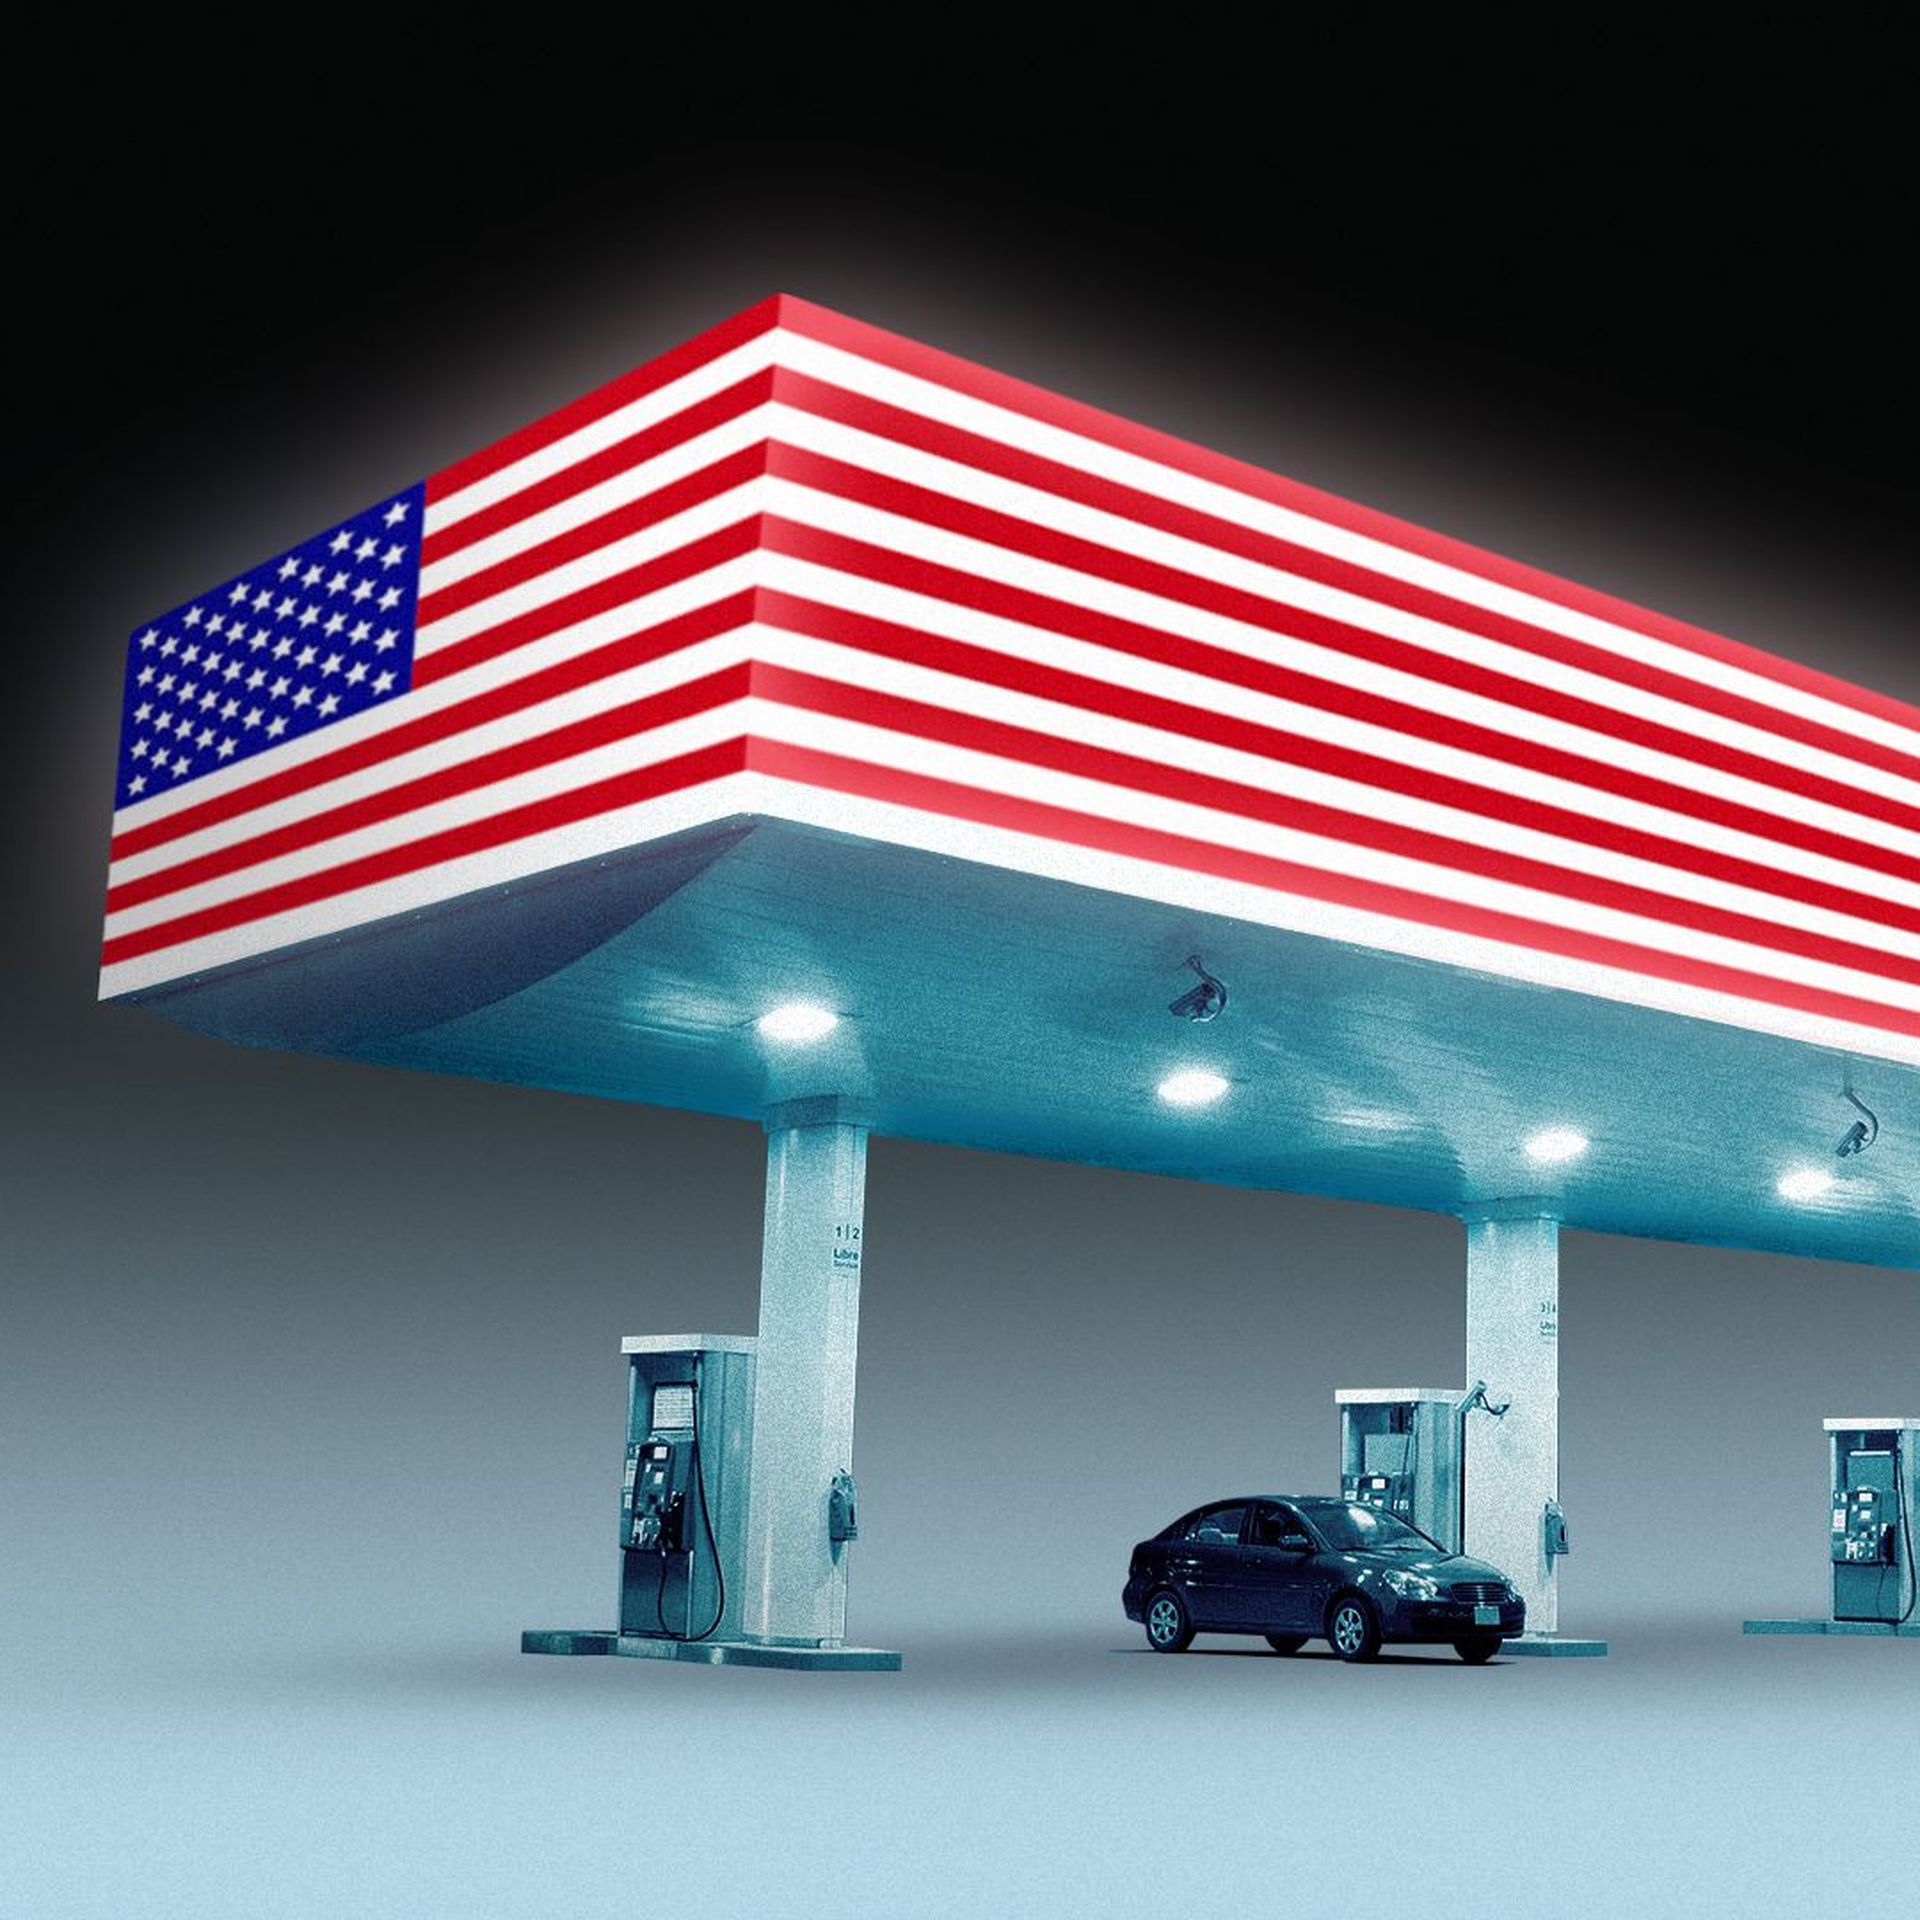 Illustration of a gas station with a roof resembling the US flag